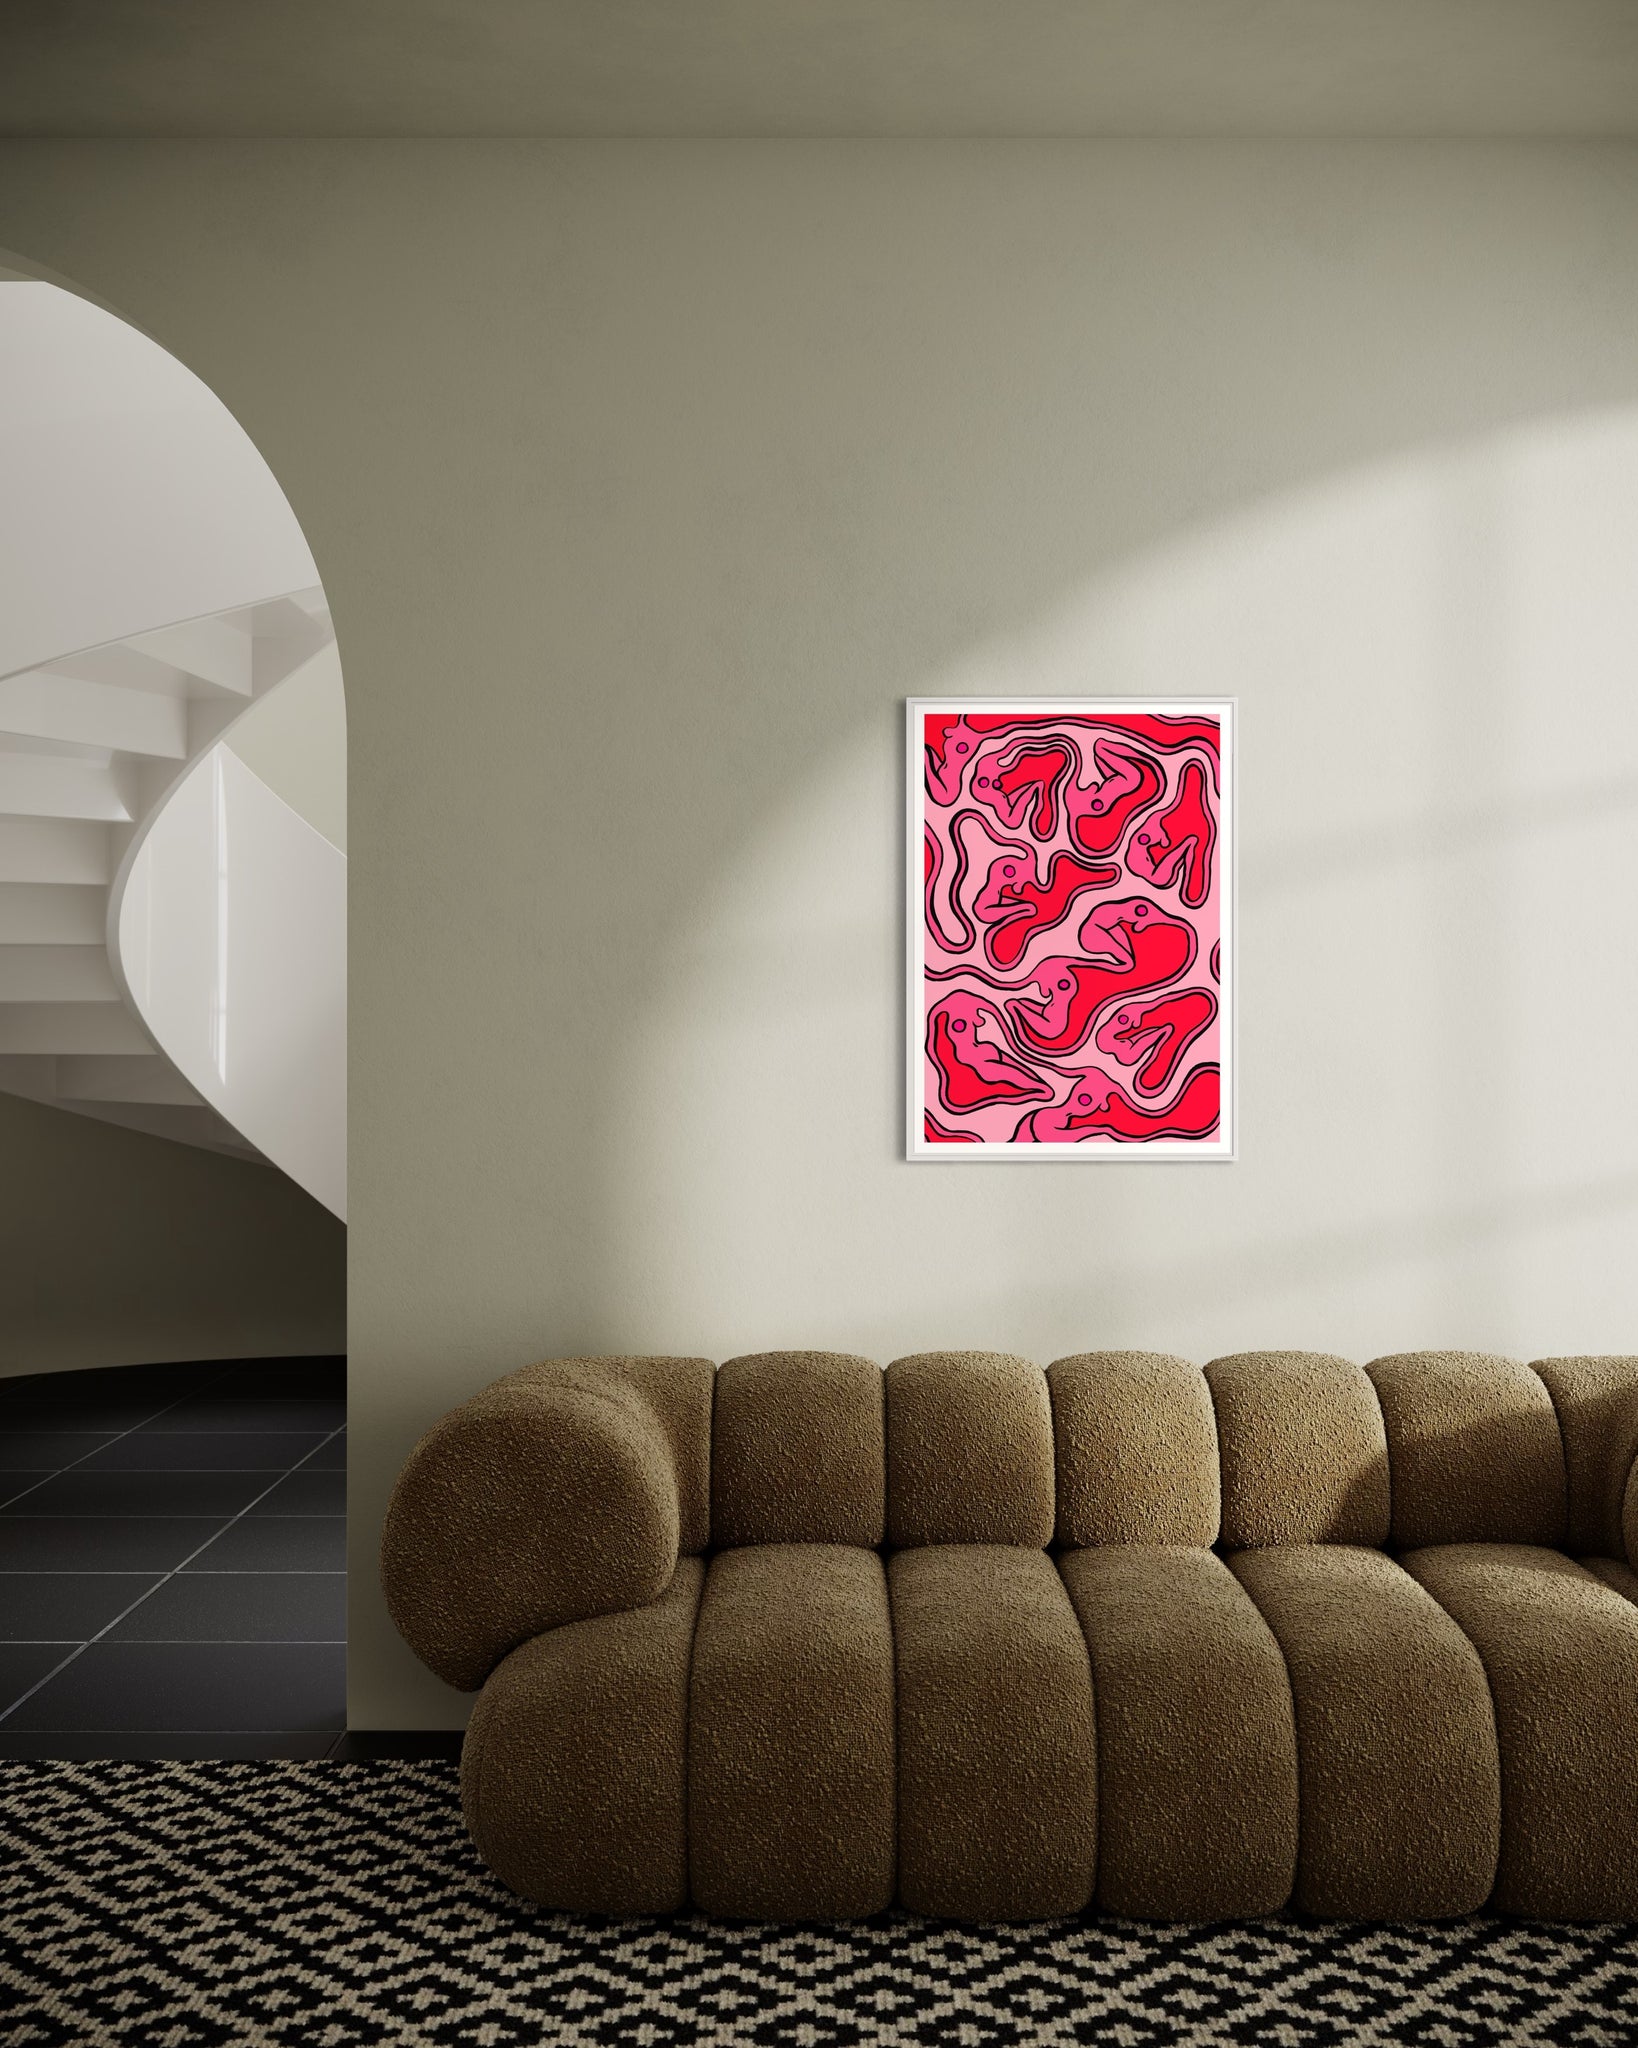 ECSTATIC NUDES PINK RED Print